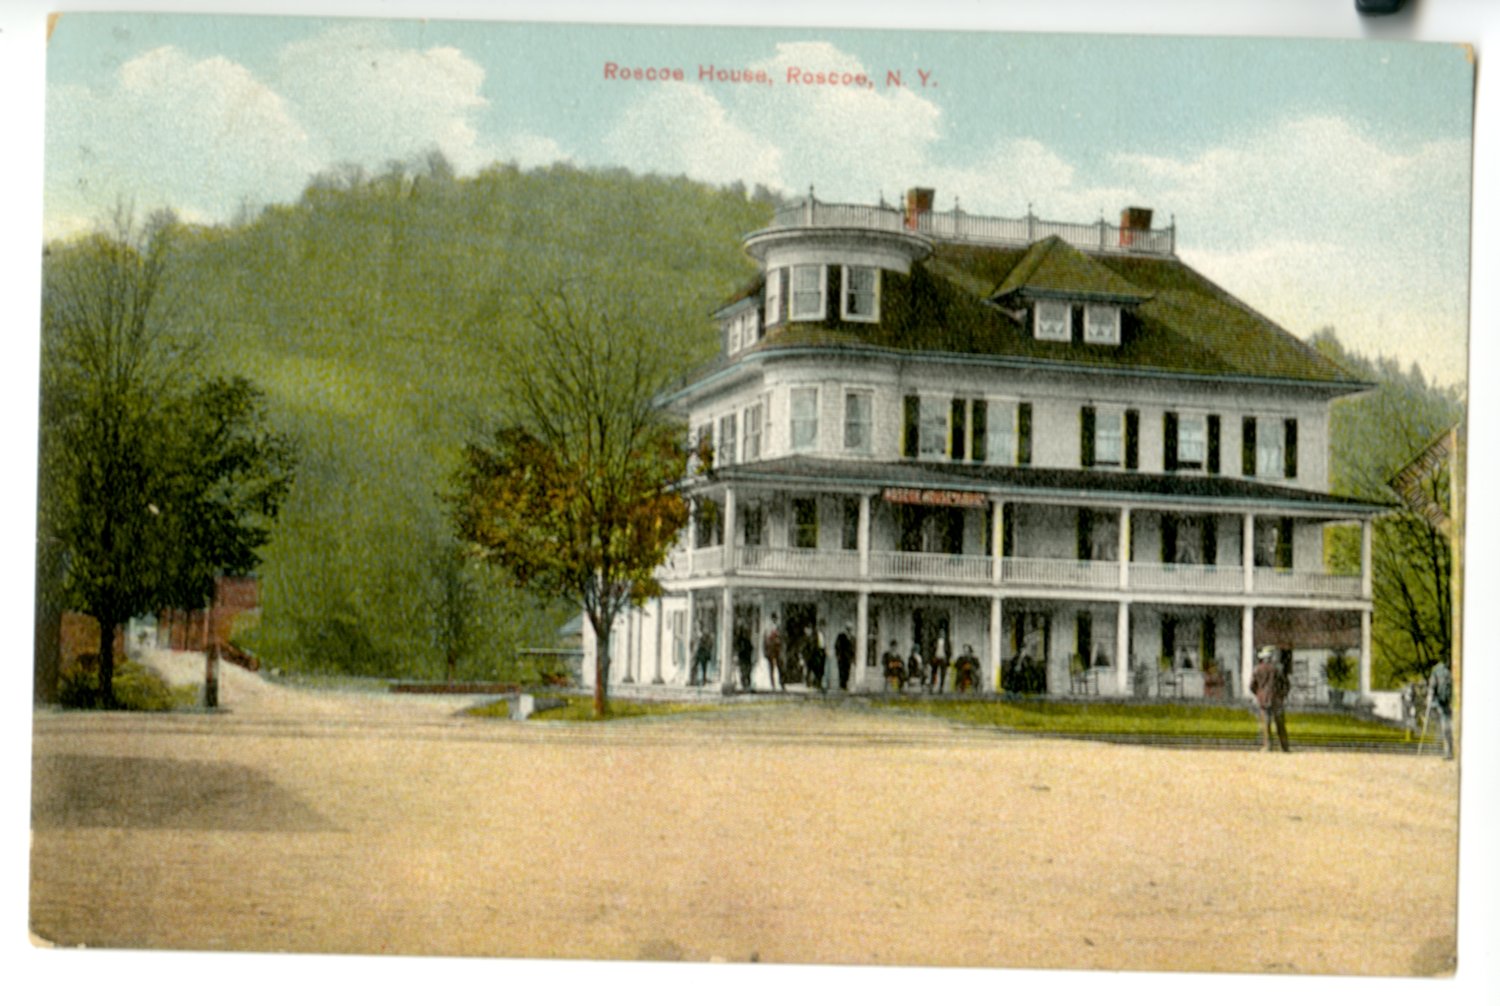 Keener family endured at hotelkeeping: 

The Roscoe House was one of the most well-known local hotels for decades. It was operated from at least 1893 by William Keener Sr. whose family had settled in Westfield Flats in the 1850s. In 1929 when the state police selected the hamlet as a location for a sub-station, they made their headquarters at the hotel. Keener's son William followed in his father's footsteps, running the hotel until his death in 1932.